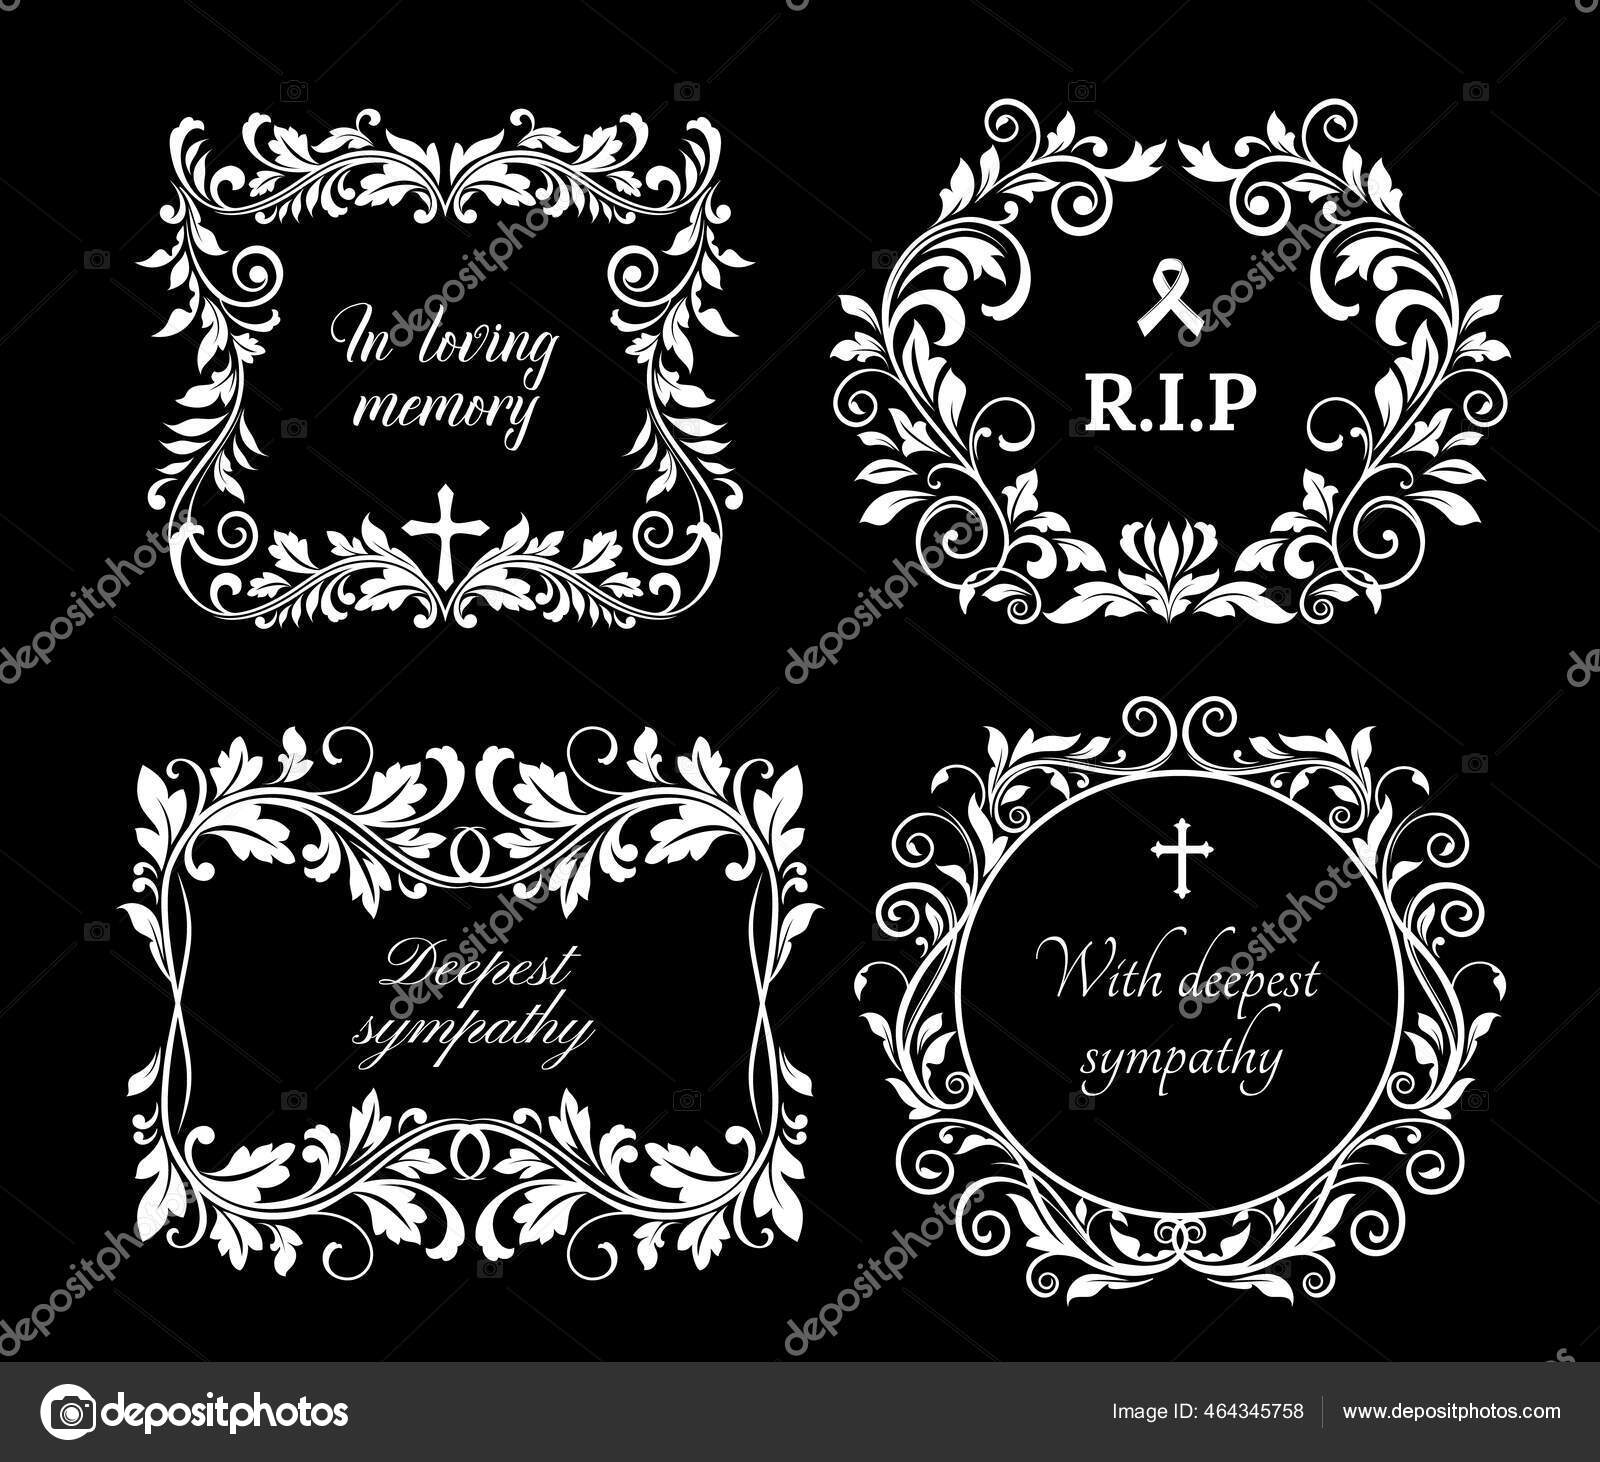 Rip frame Vectors & Illustrations for Free Download